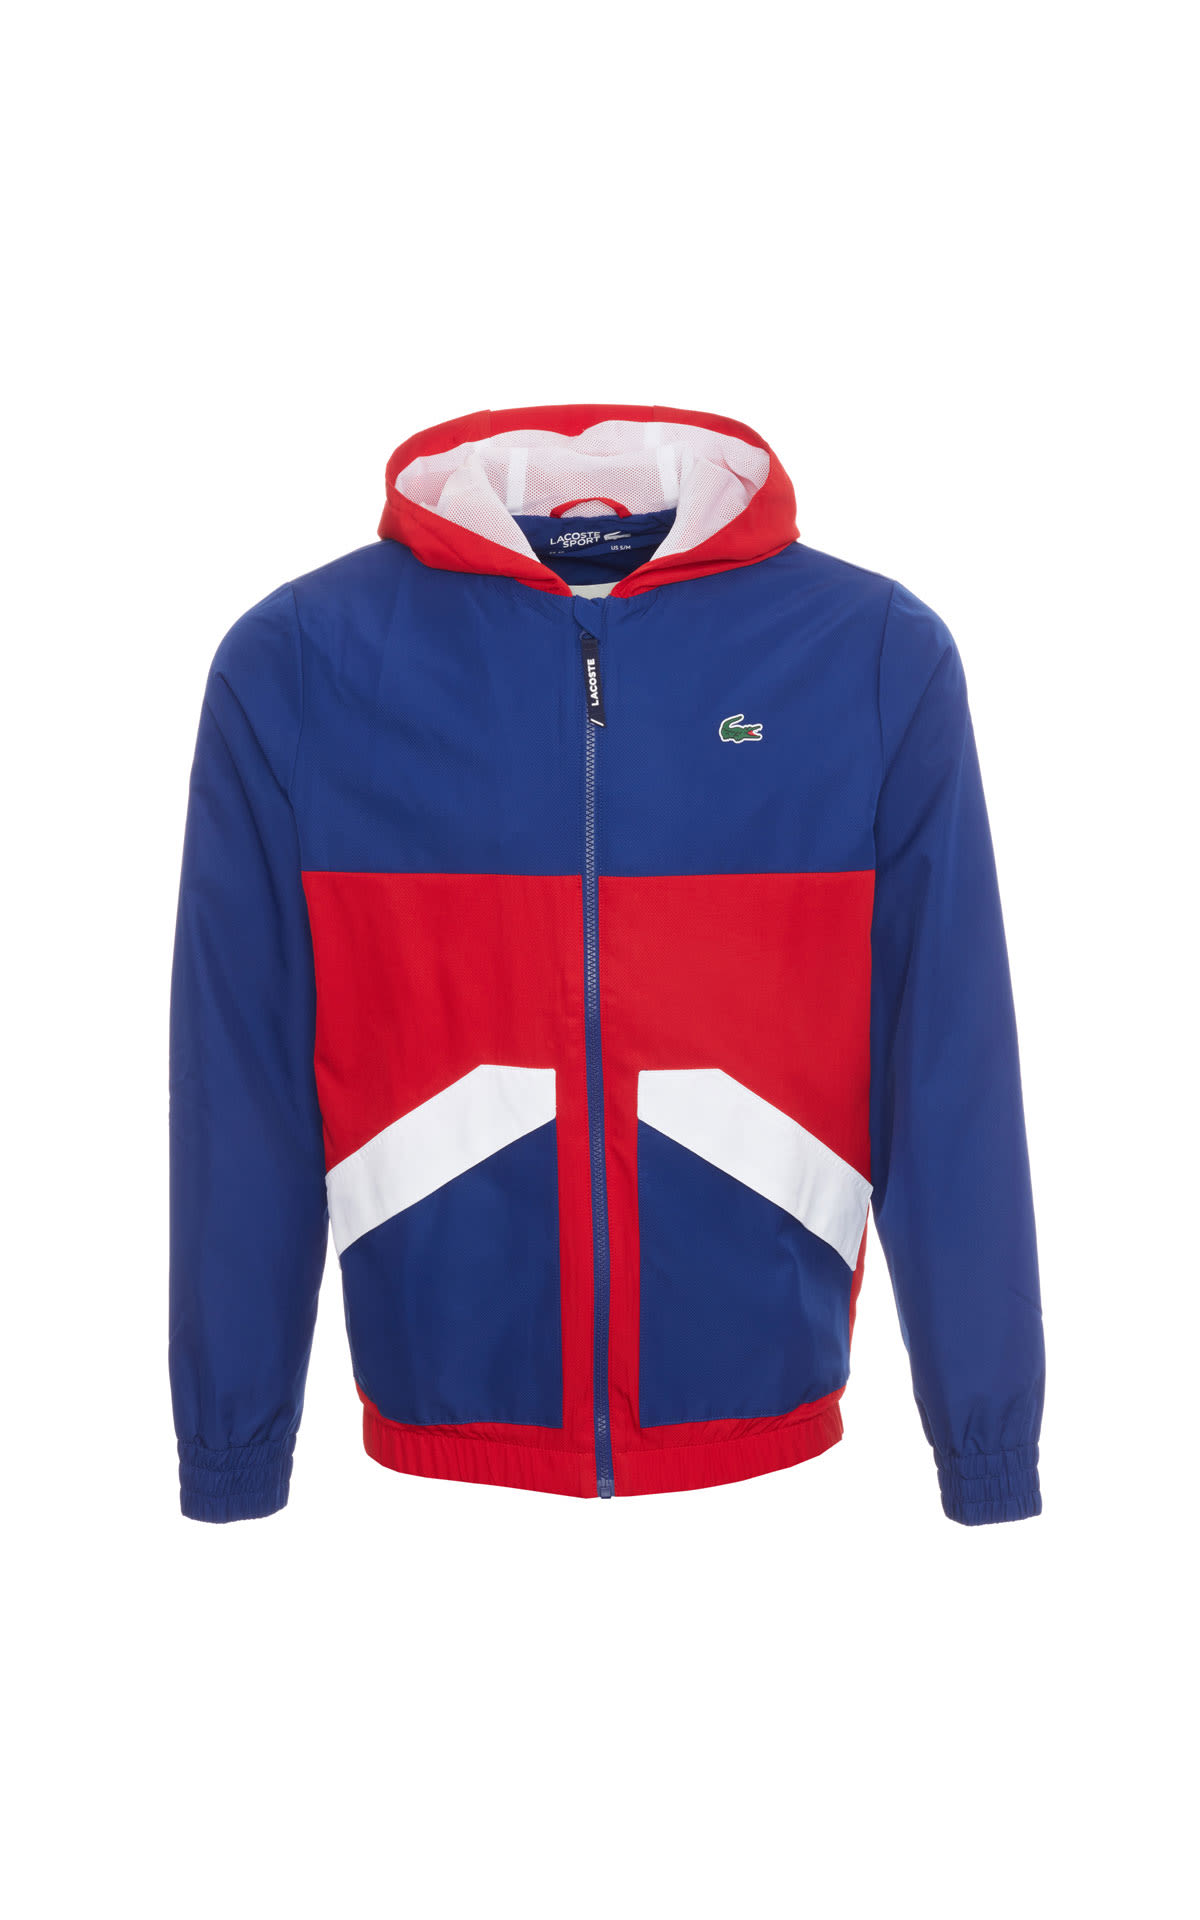 Lacoste Red and blue sports jacket from Bicester Village